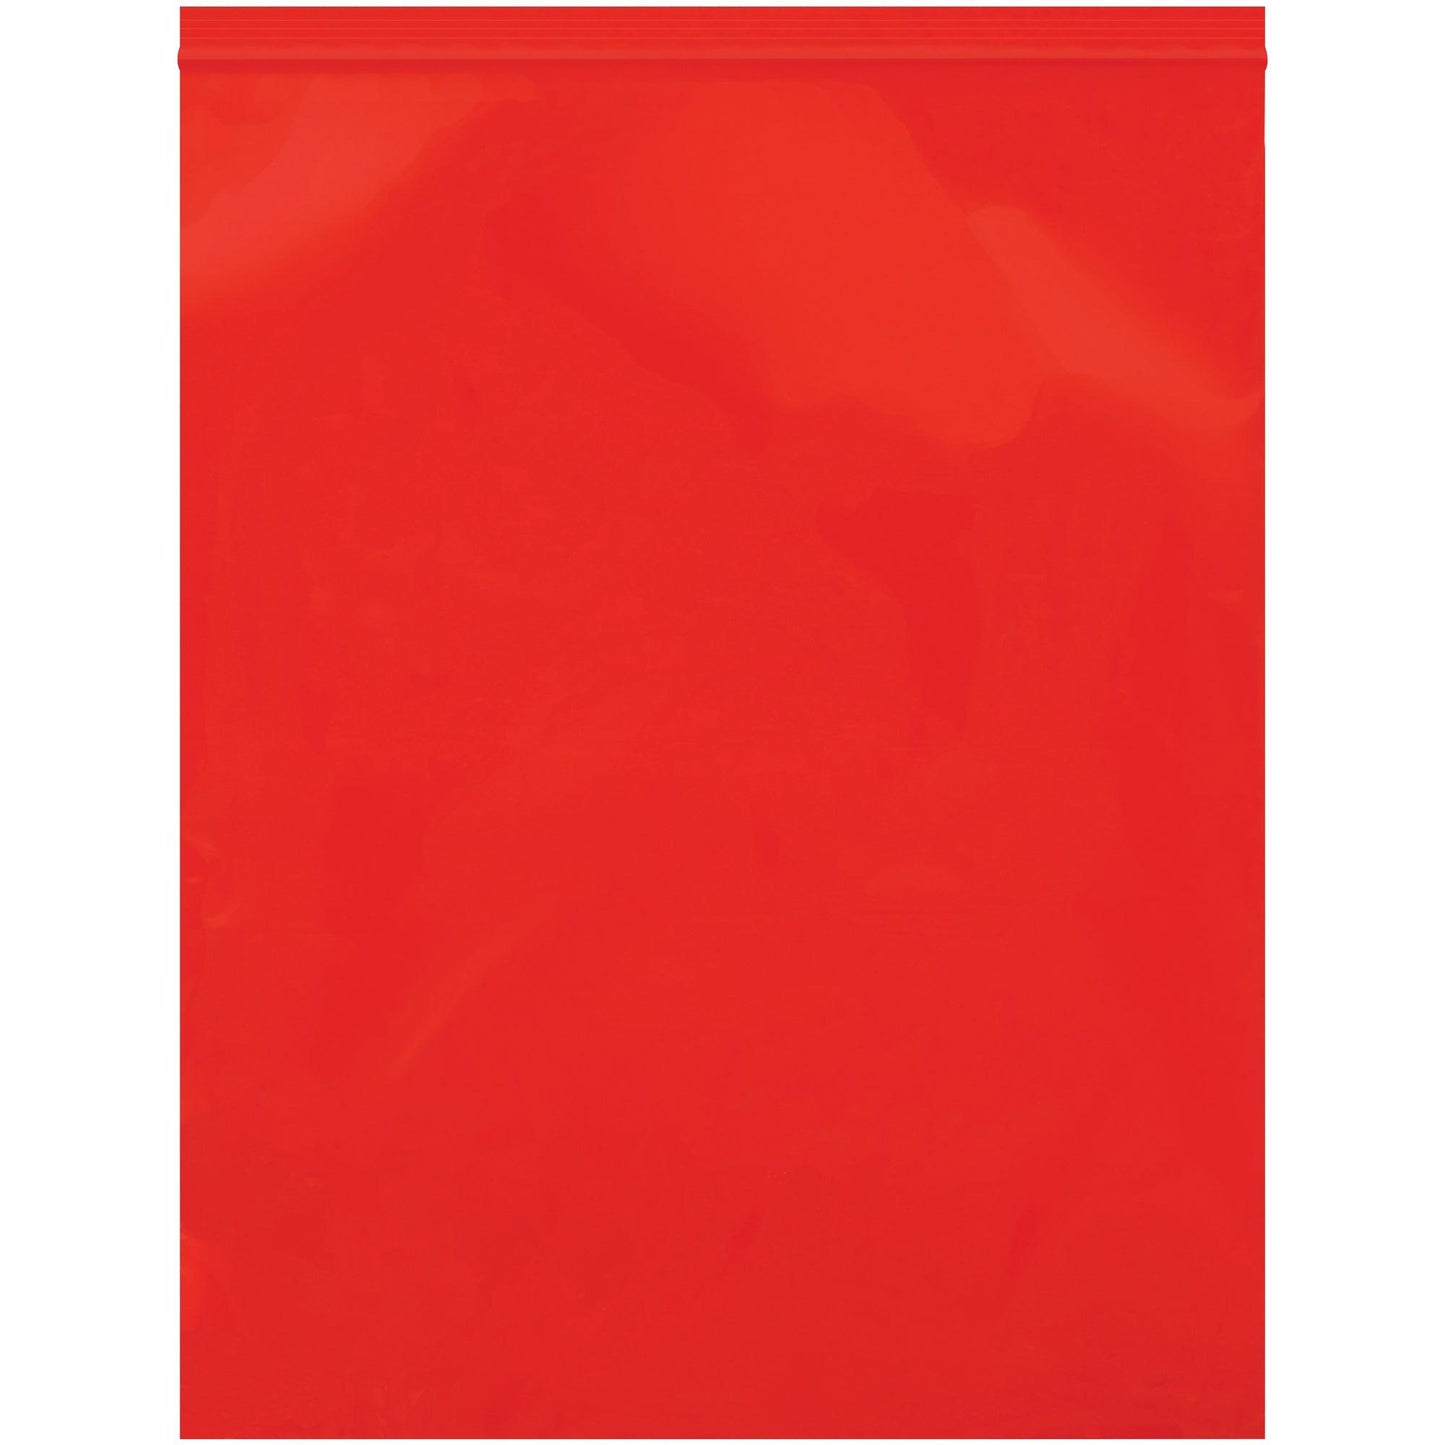 12 x 15" - 2 Mil Red Reclosable Poly Bags - PB3670R